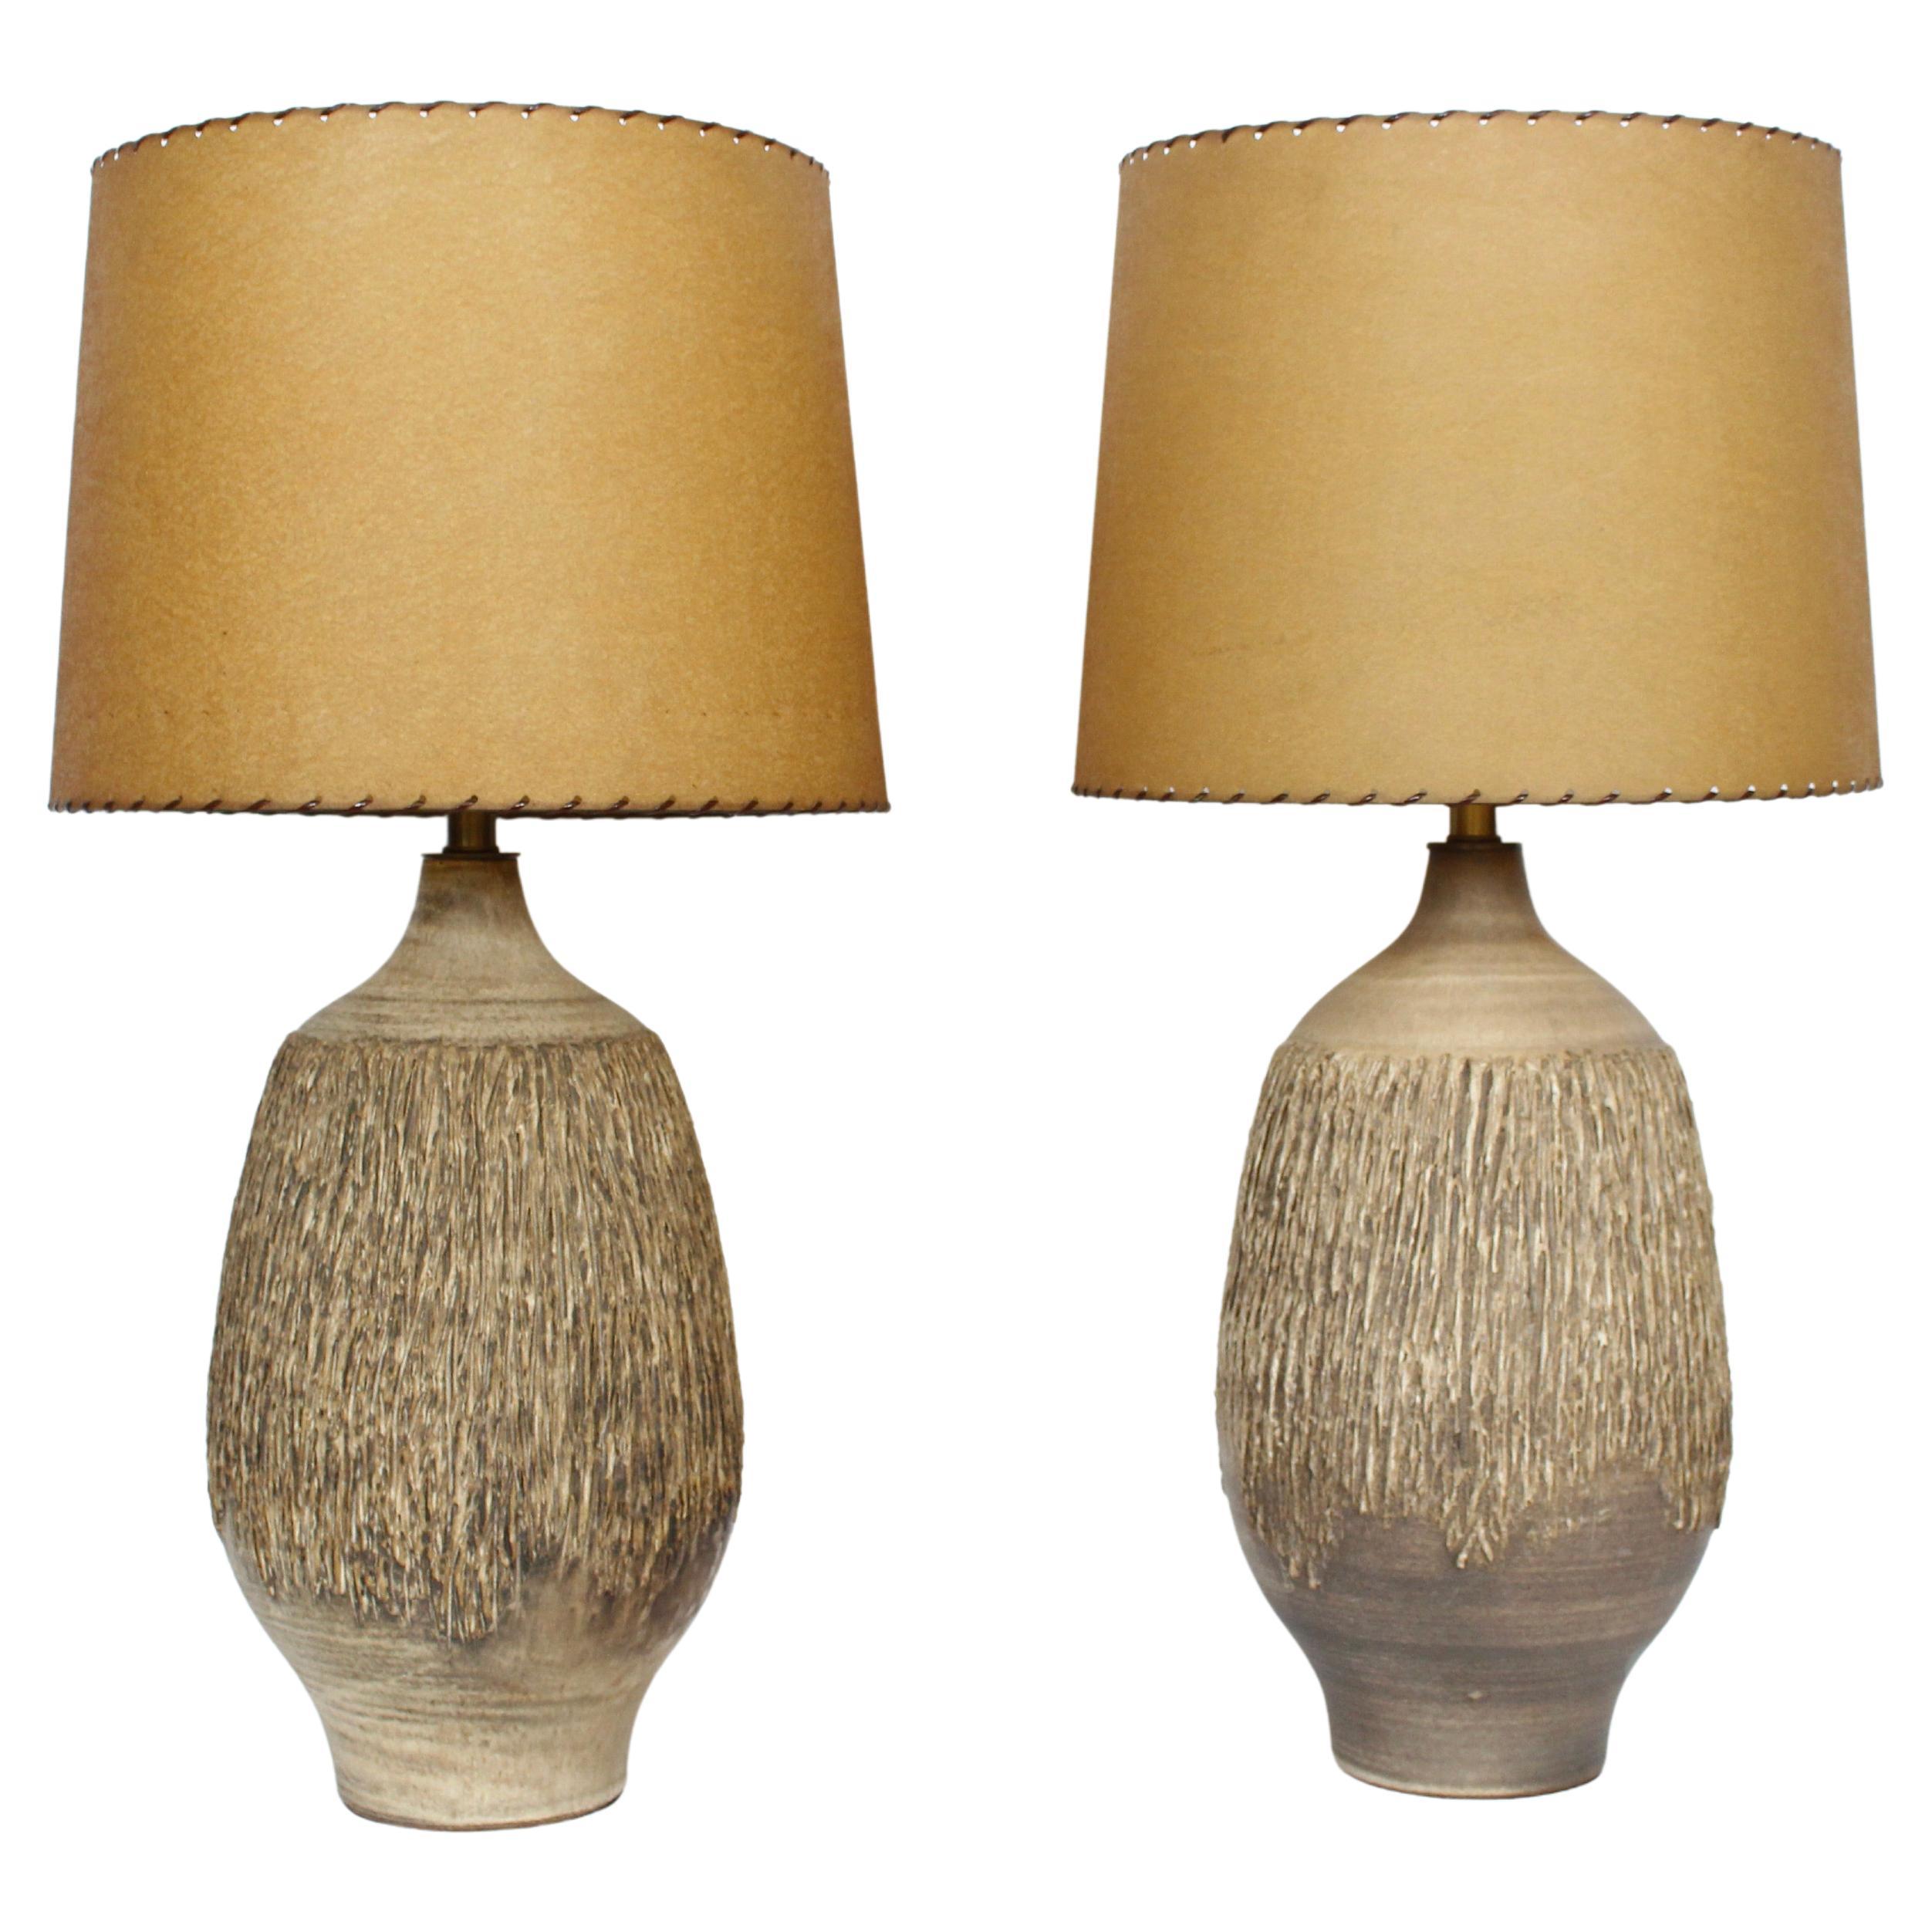 Pair Lee Rosen for Design Technics Hand Thrown Glazed table lamps, 1950's. Featuring tall earthen organic matte bottle forms with glazed Taupe, Coffee, natural Cream tones and hand applied textural vertical bark like detail. Brass neck. 23 to top of